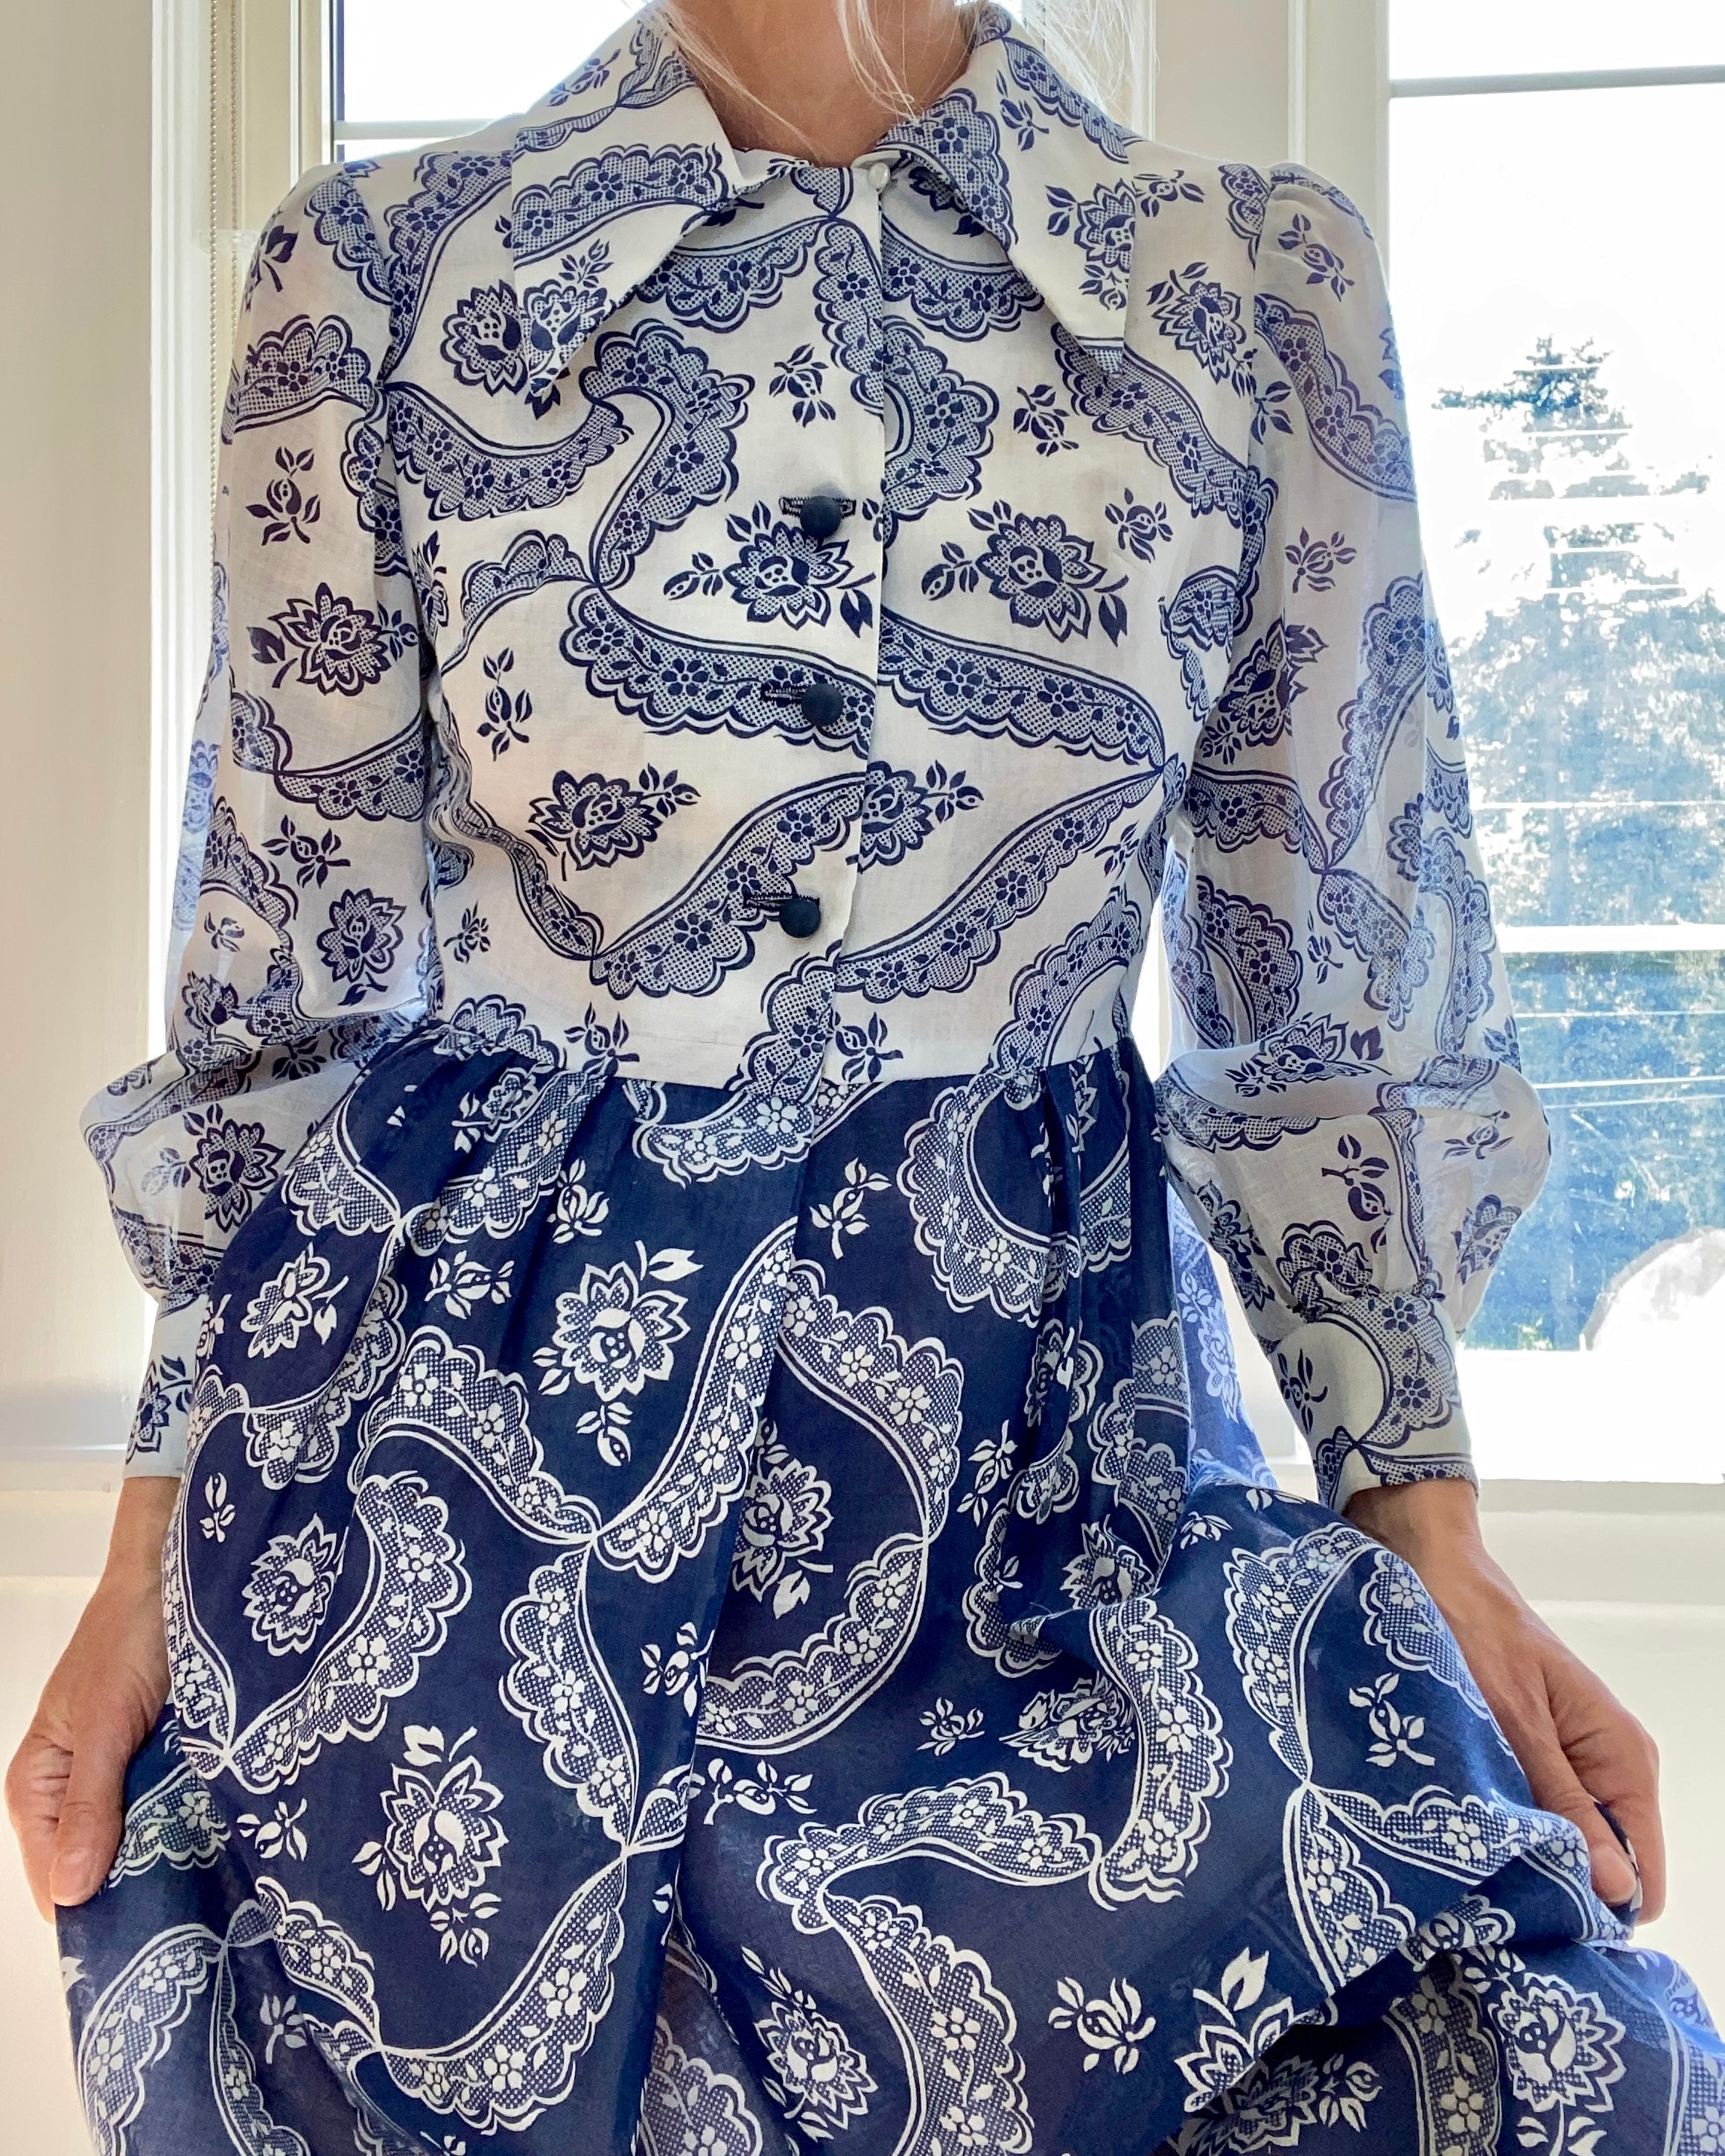 VINTAGE 1970s Blue and White Tea Cup Print Dress